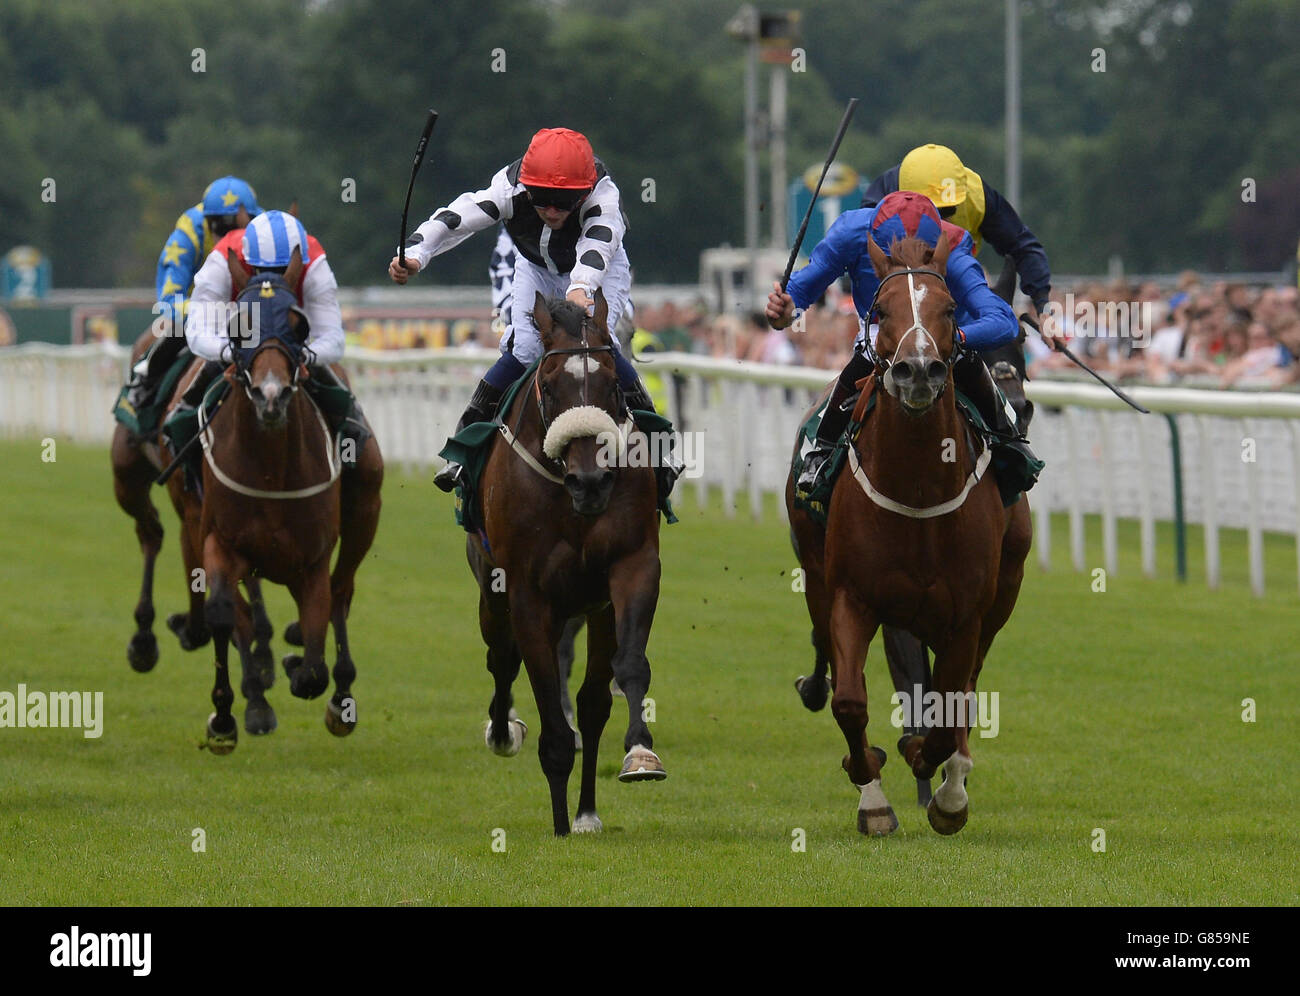 Master Carpenter ridden by Phillip Makin (right) wins the 56th John Smith's Cup day two of the John Smith's Cup Meeting at York Racecourse. Stock Photo